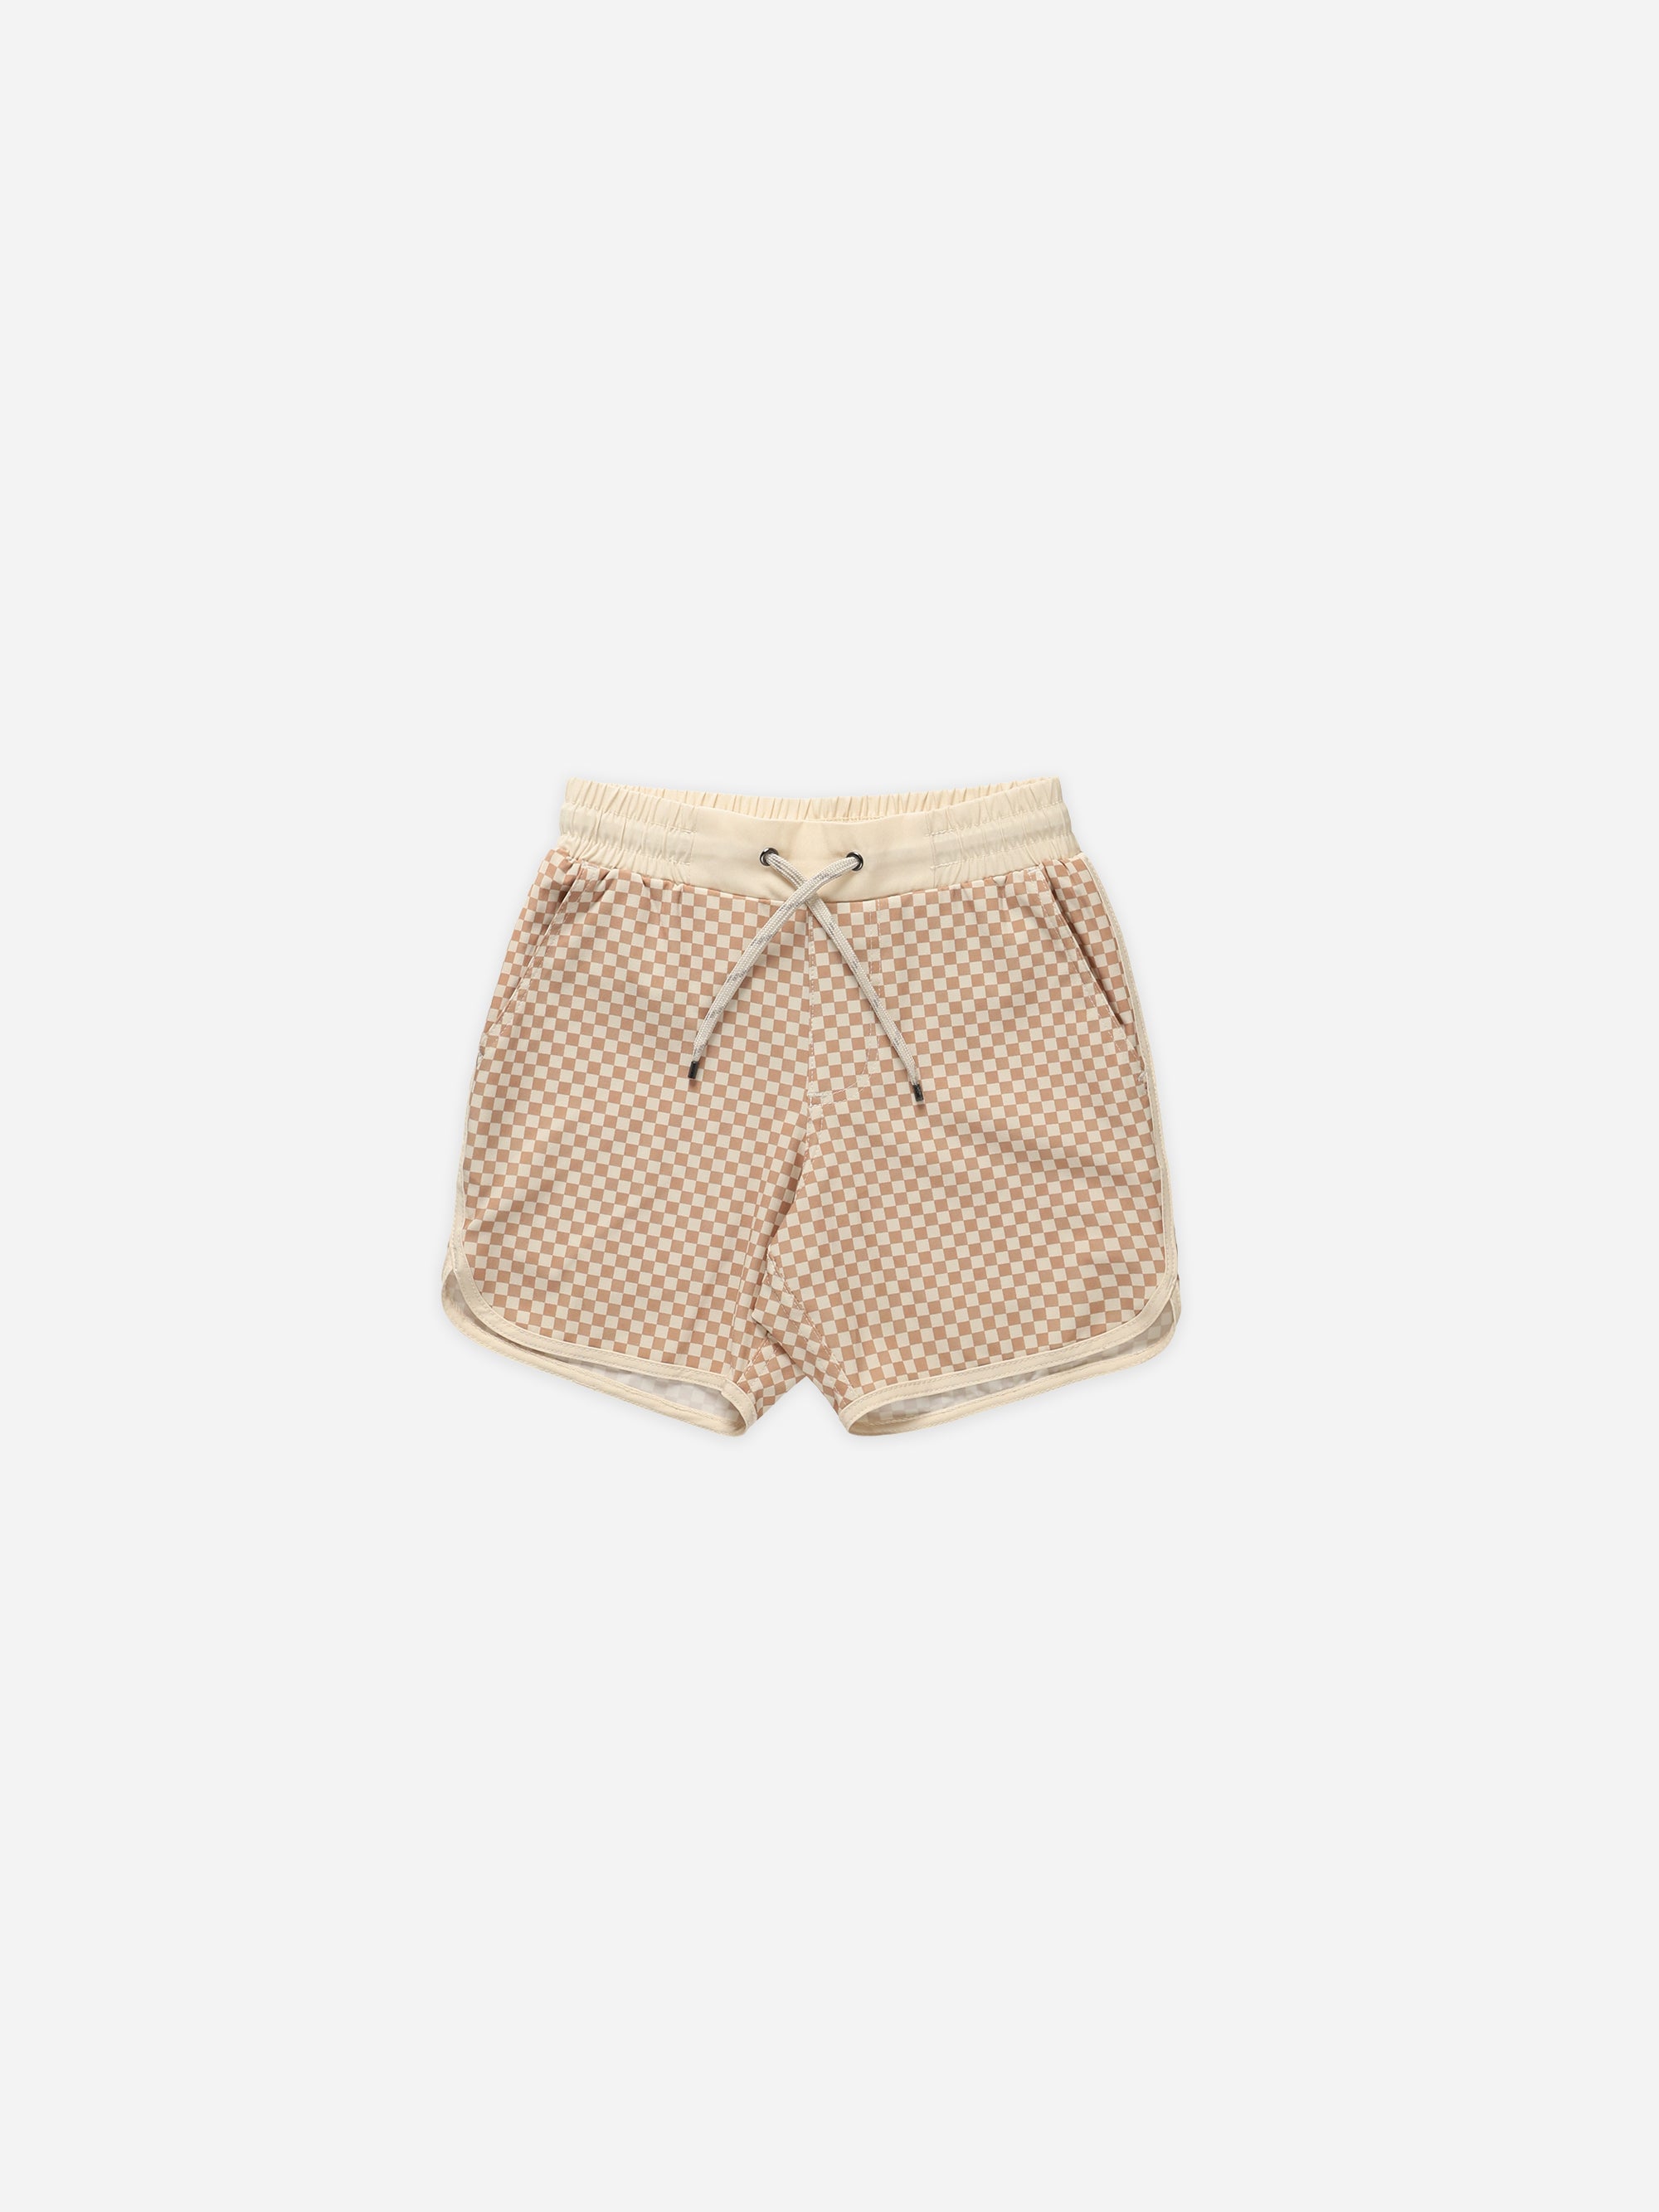 Del Mar Short || Clay Micro Check - Rylee + Cru | Kids Clothes | Trendy Baby Clothes | Modern Infant Outfits |